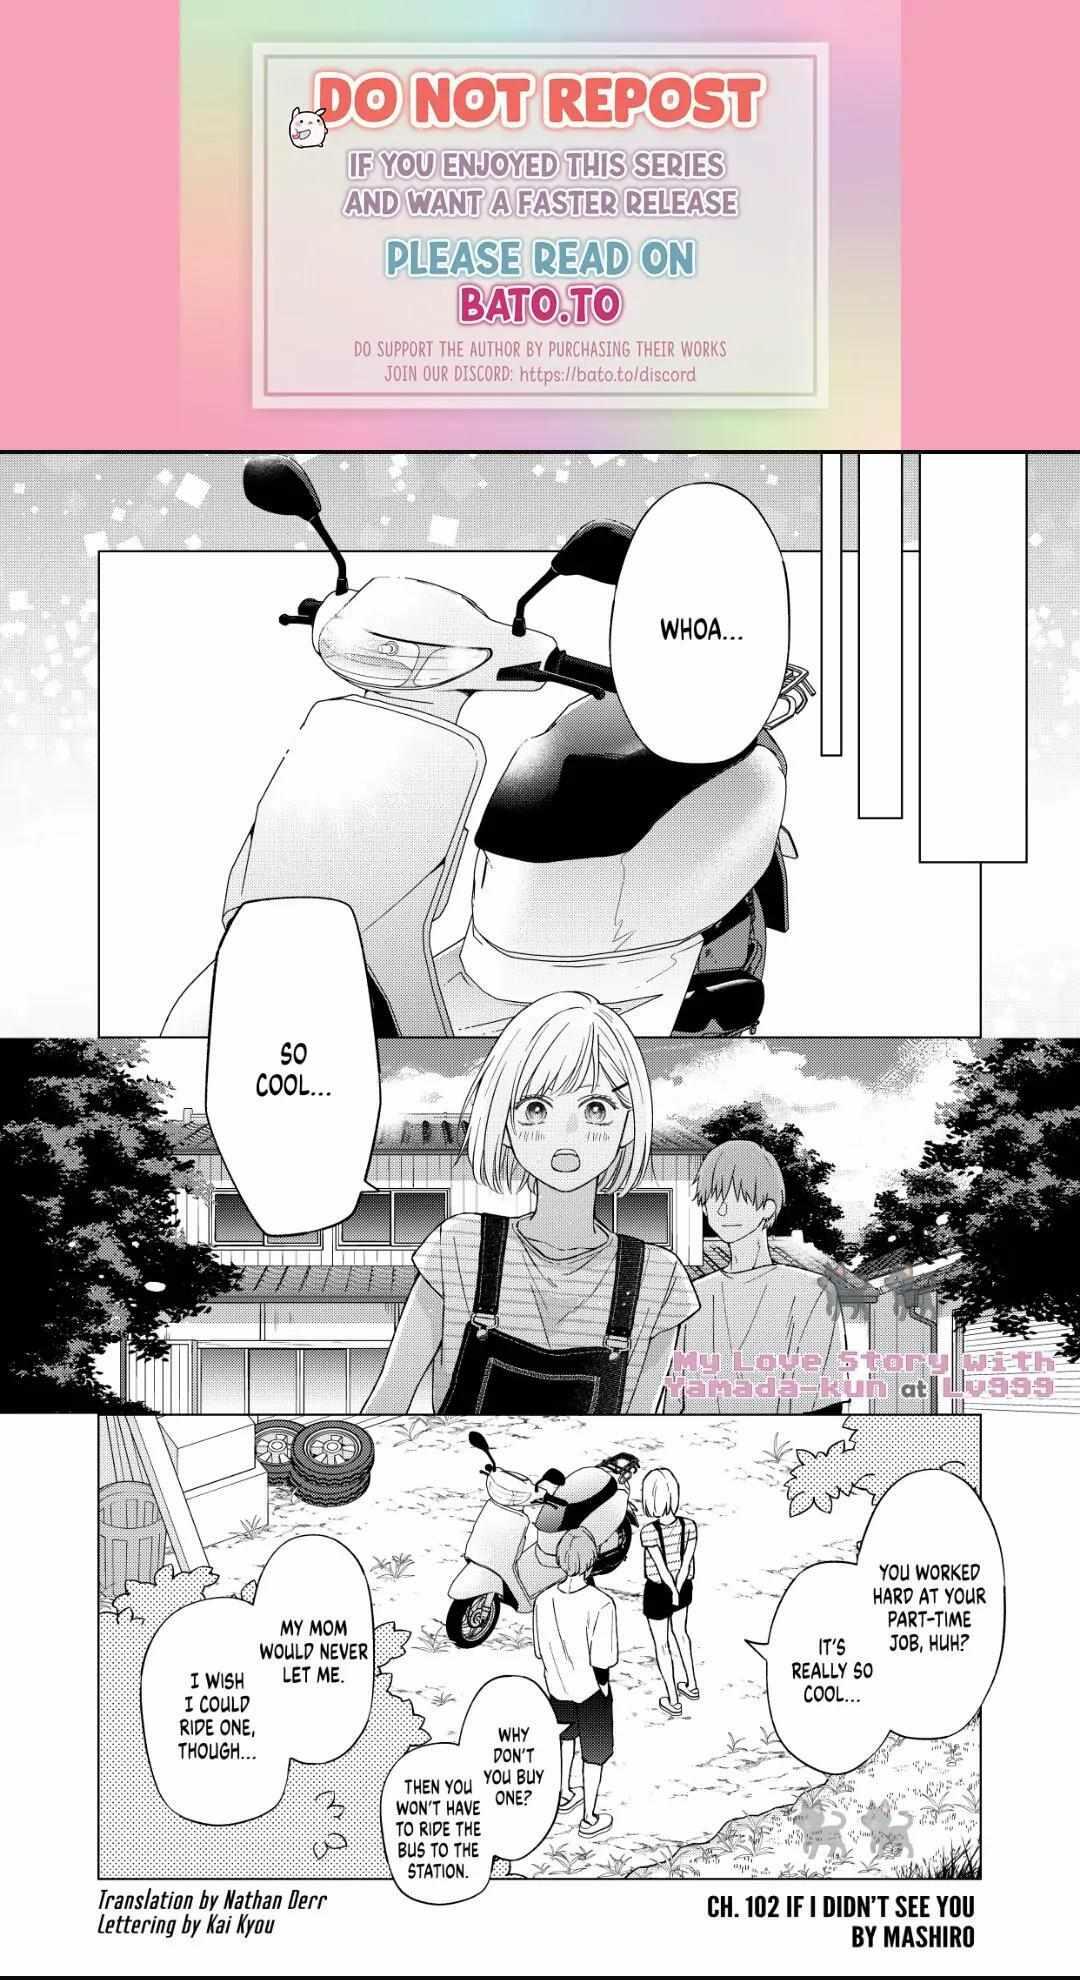 Chapter 97, My Love Story with Yamada-kun at Lv999